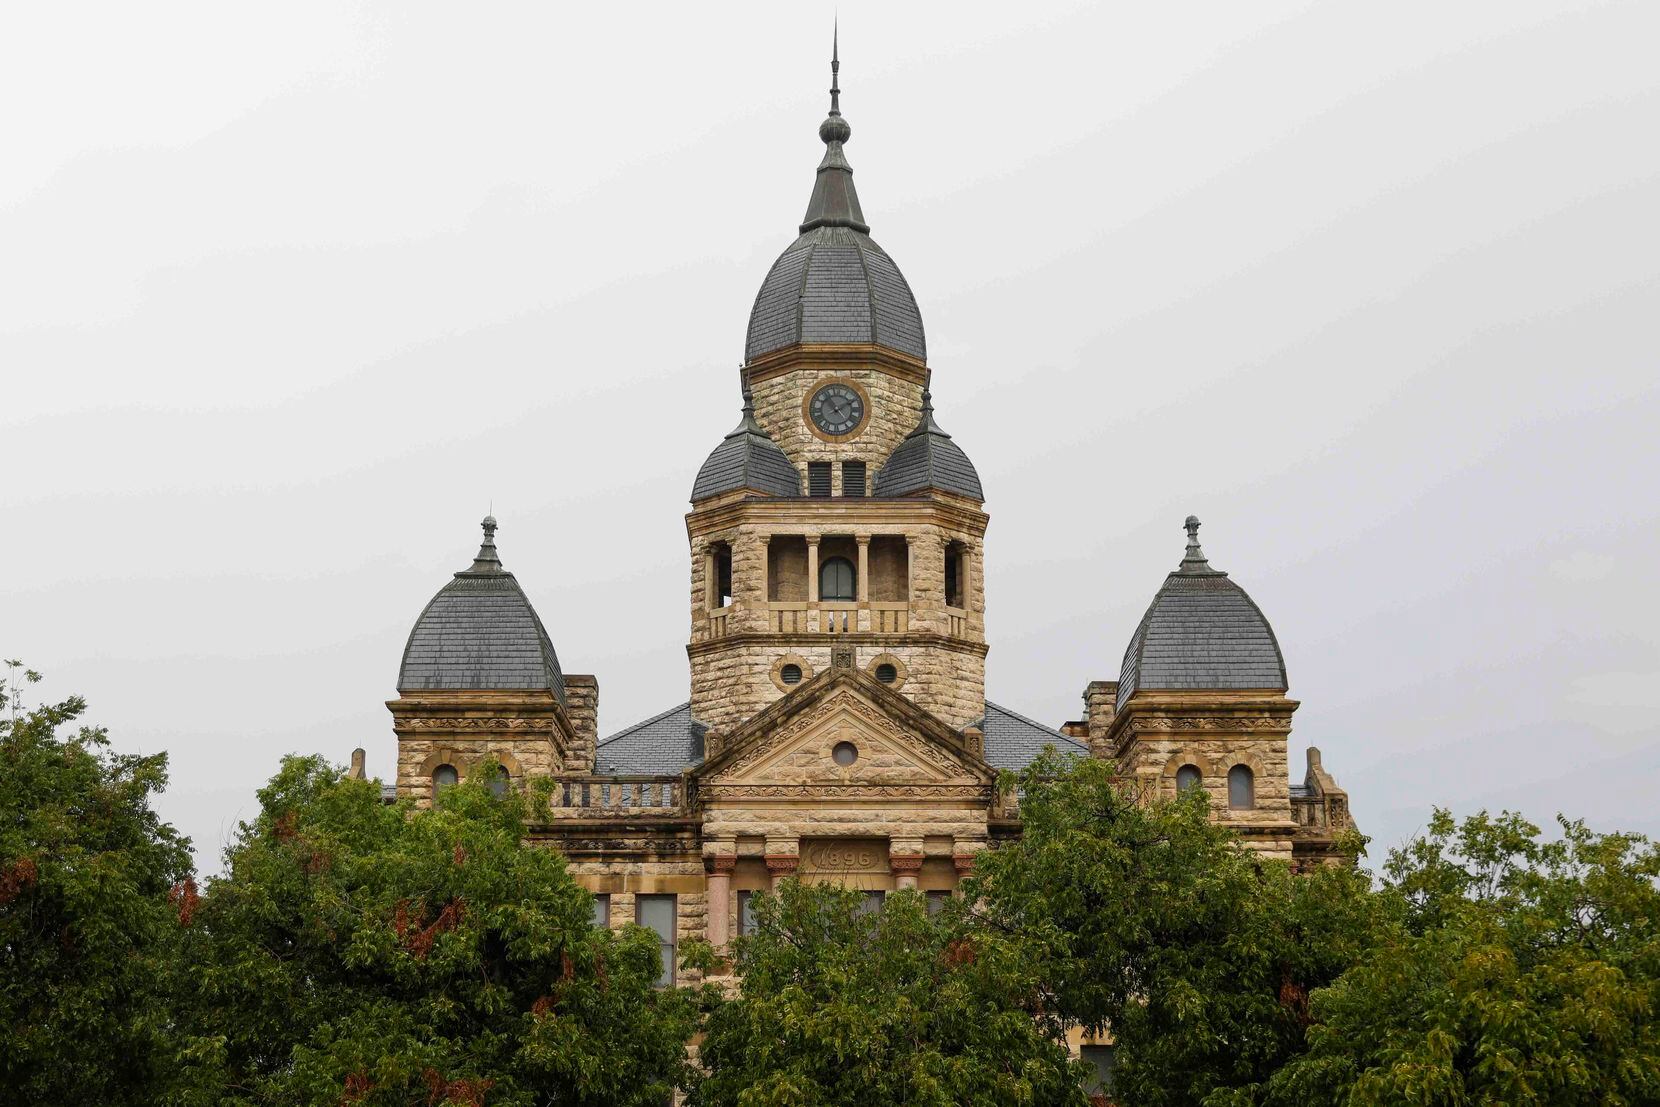 For many, the former Denton County Courthouse in Denton represents the county's long...